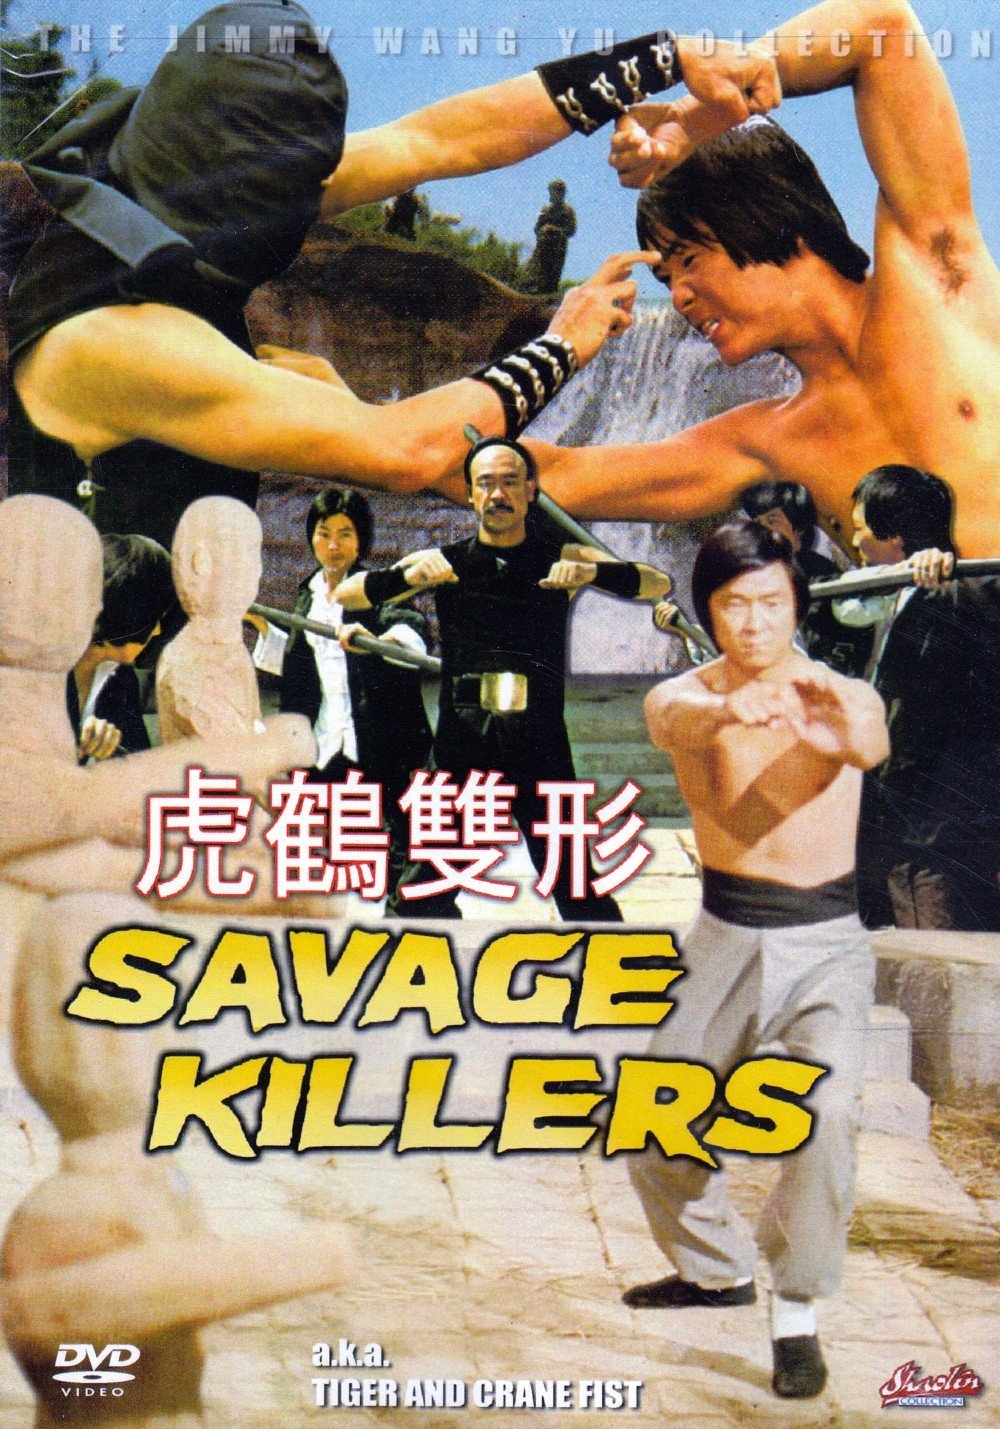 Savage Killers / Tiger and Crane Fist - Donnie Yen Kung Fu Action movie DVD